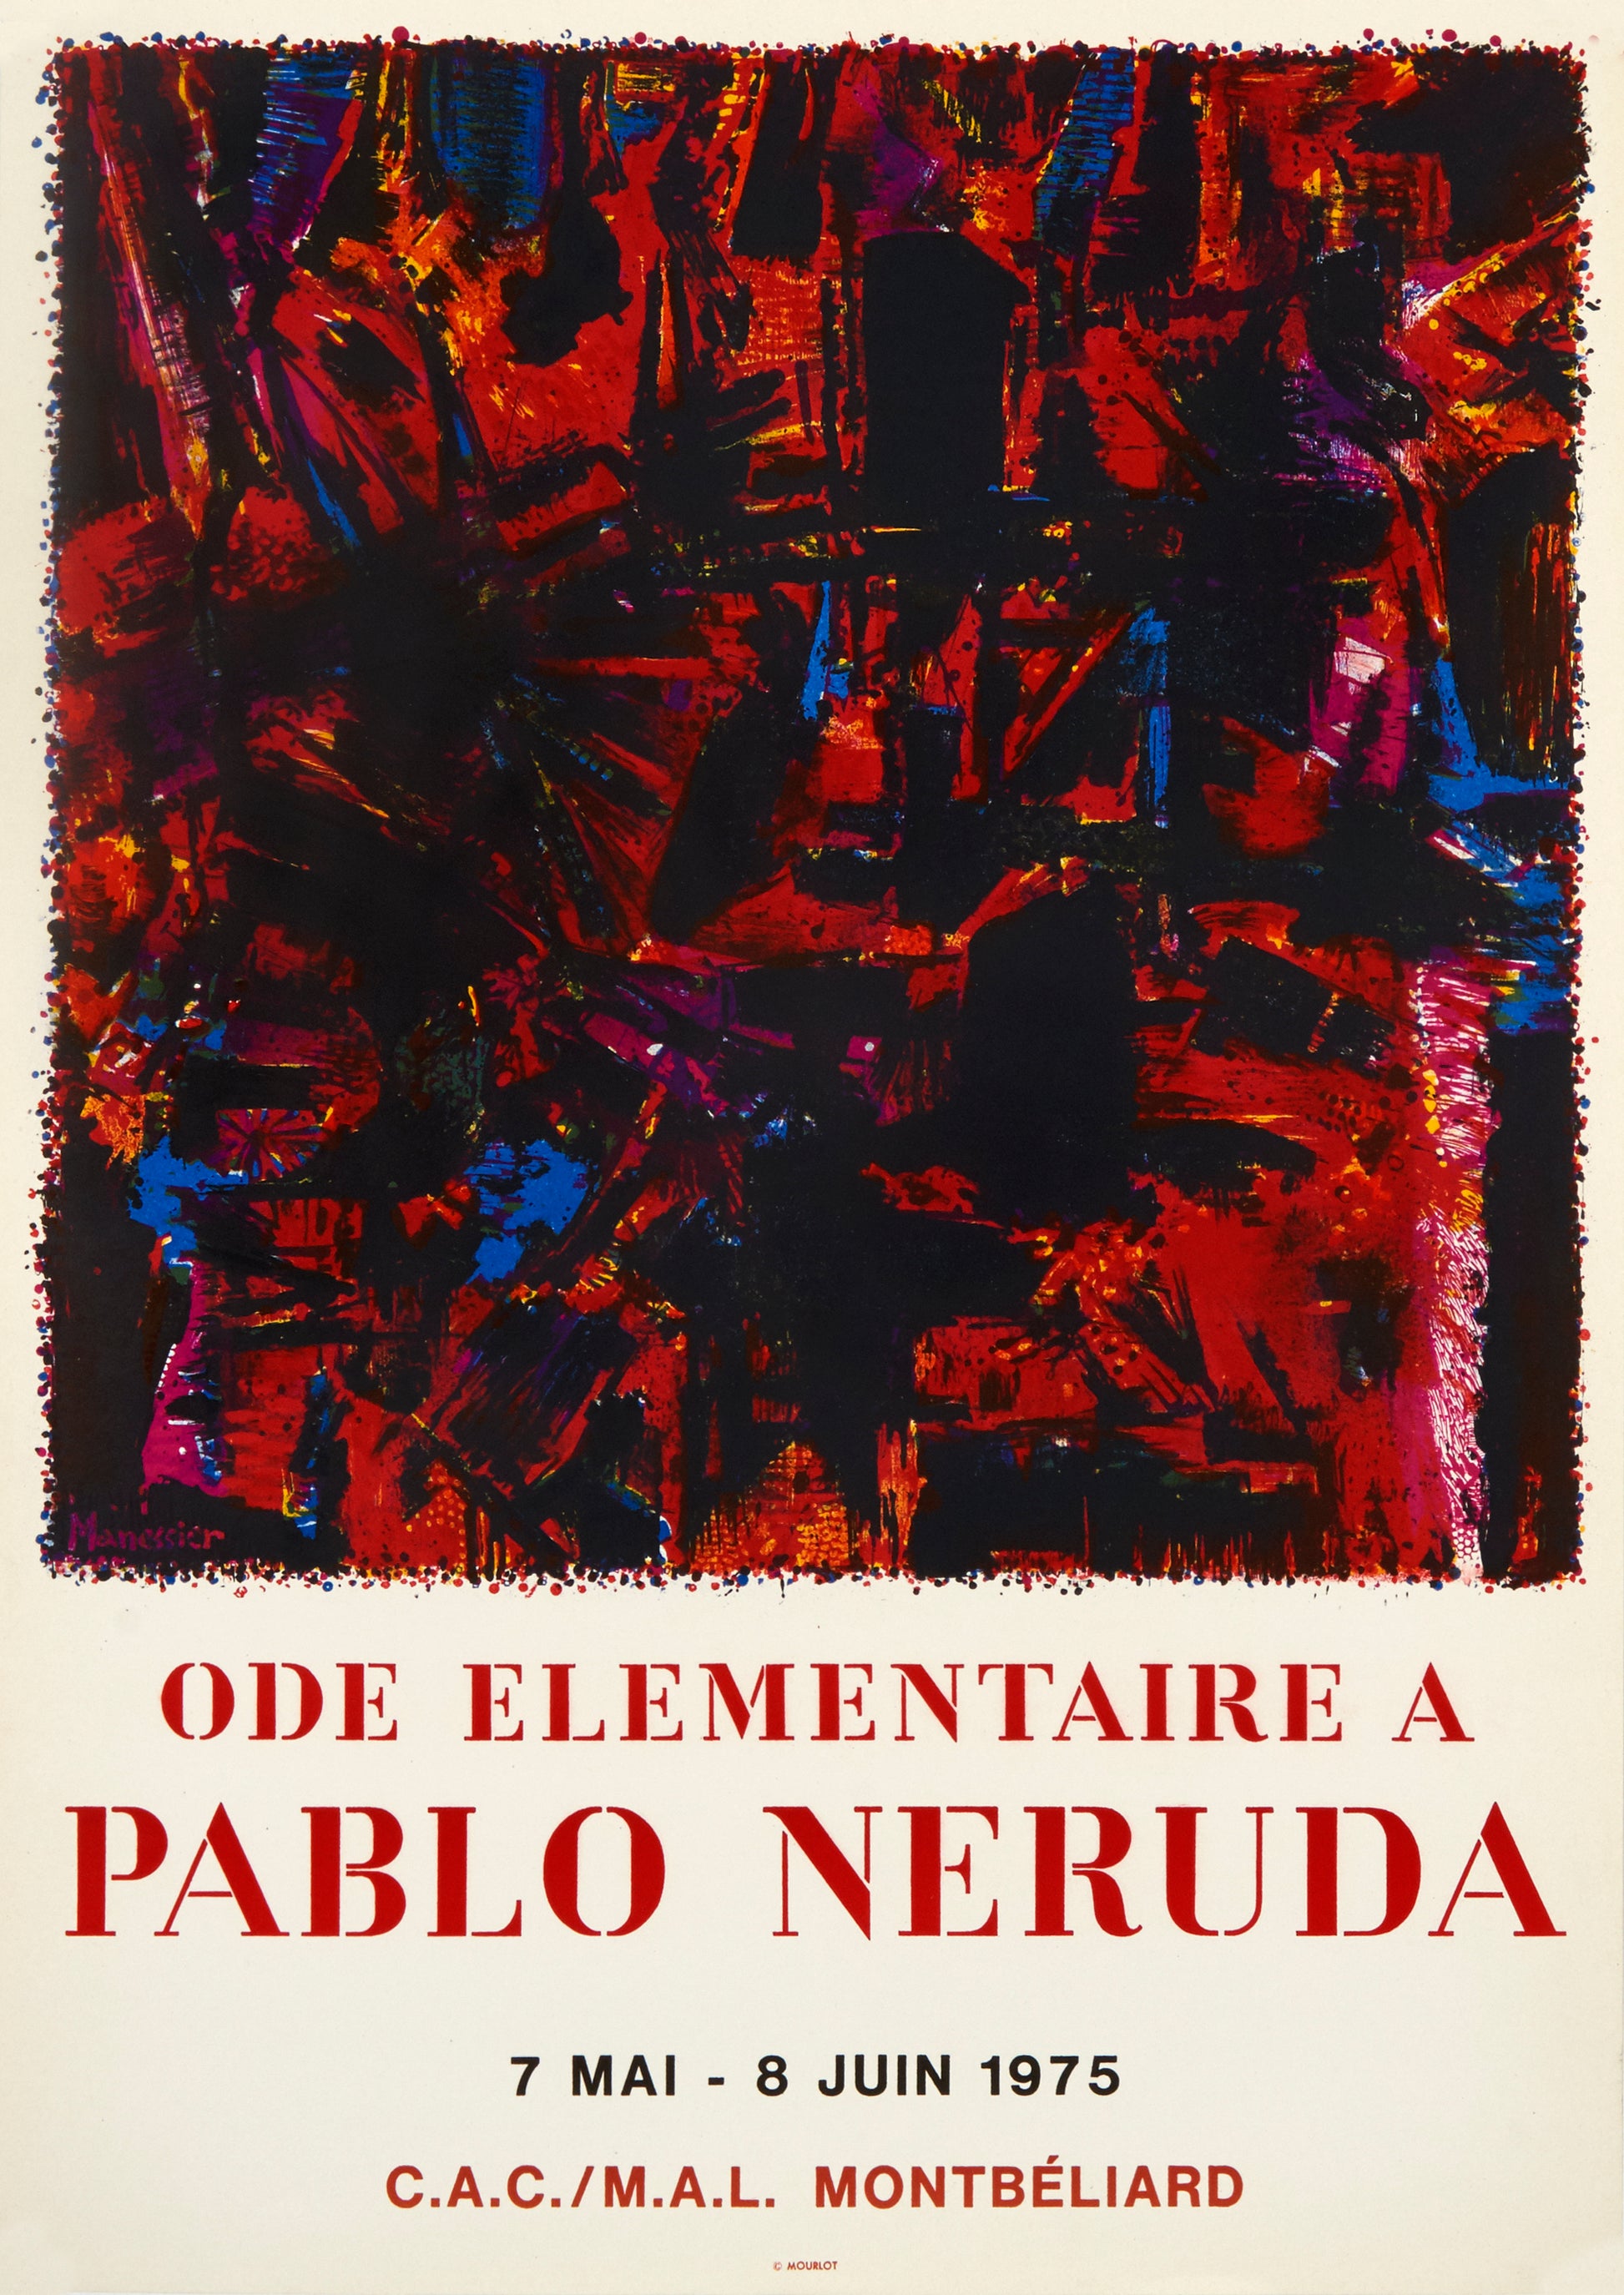 Ode elementaire a Pablo Neruda by Alfred Manessier, 1975 - Mourlot Editions - Fine_Art - Poster - Lithograph - Wall Art - Vintage - Prints - Original